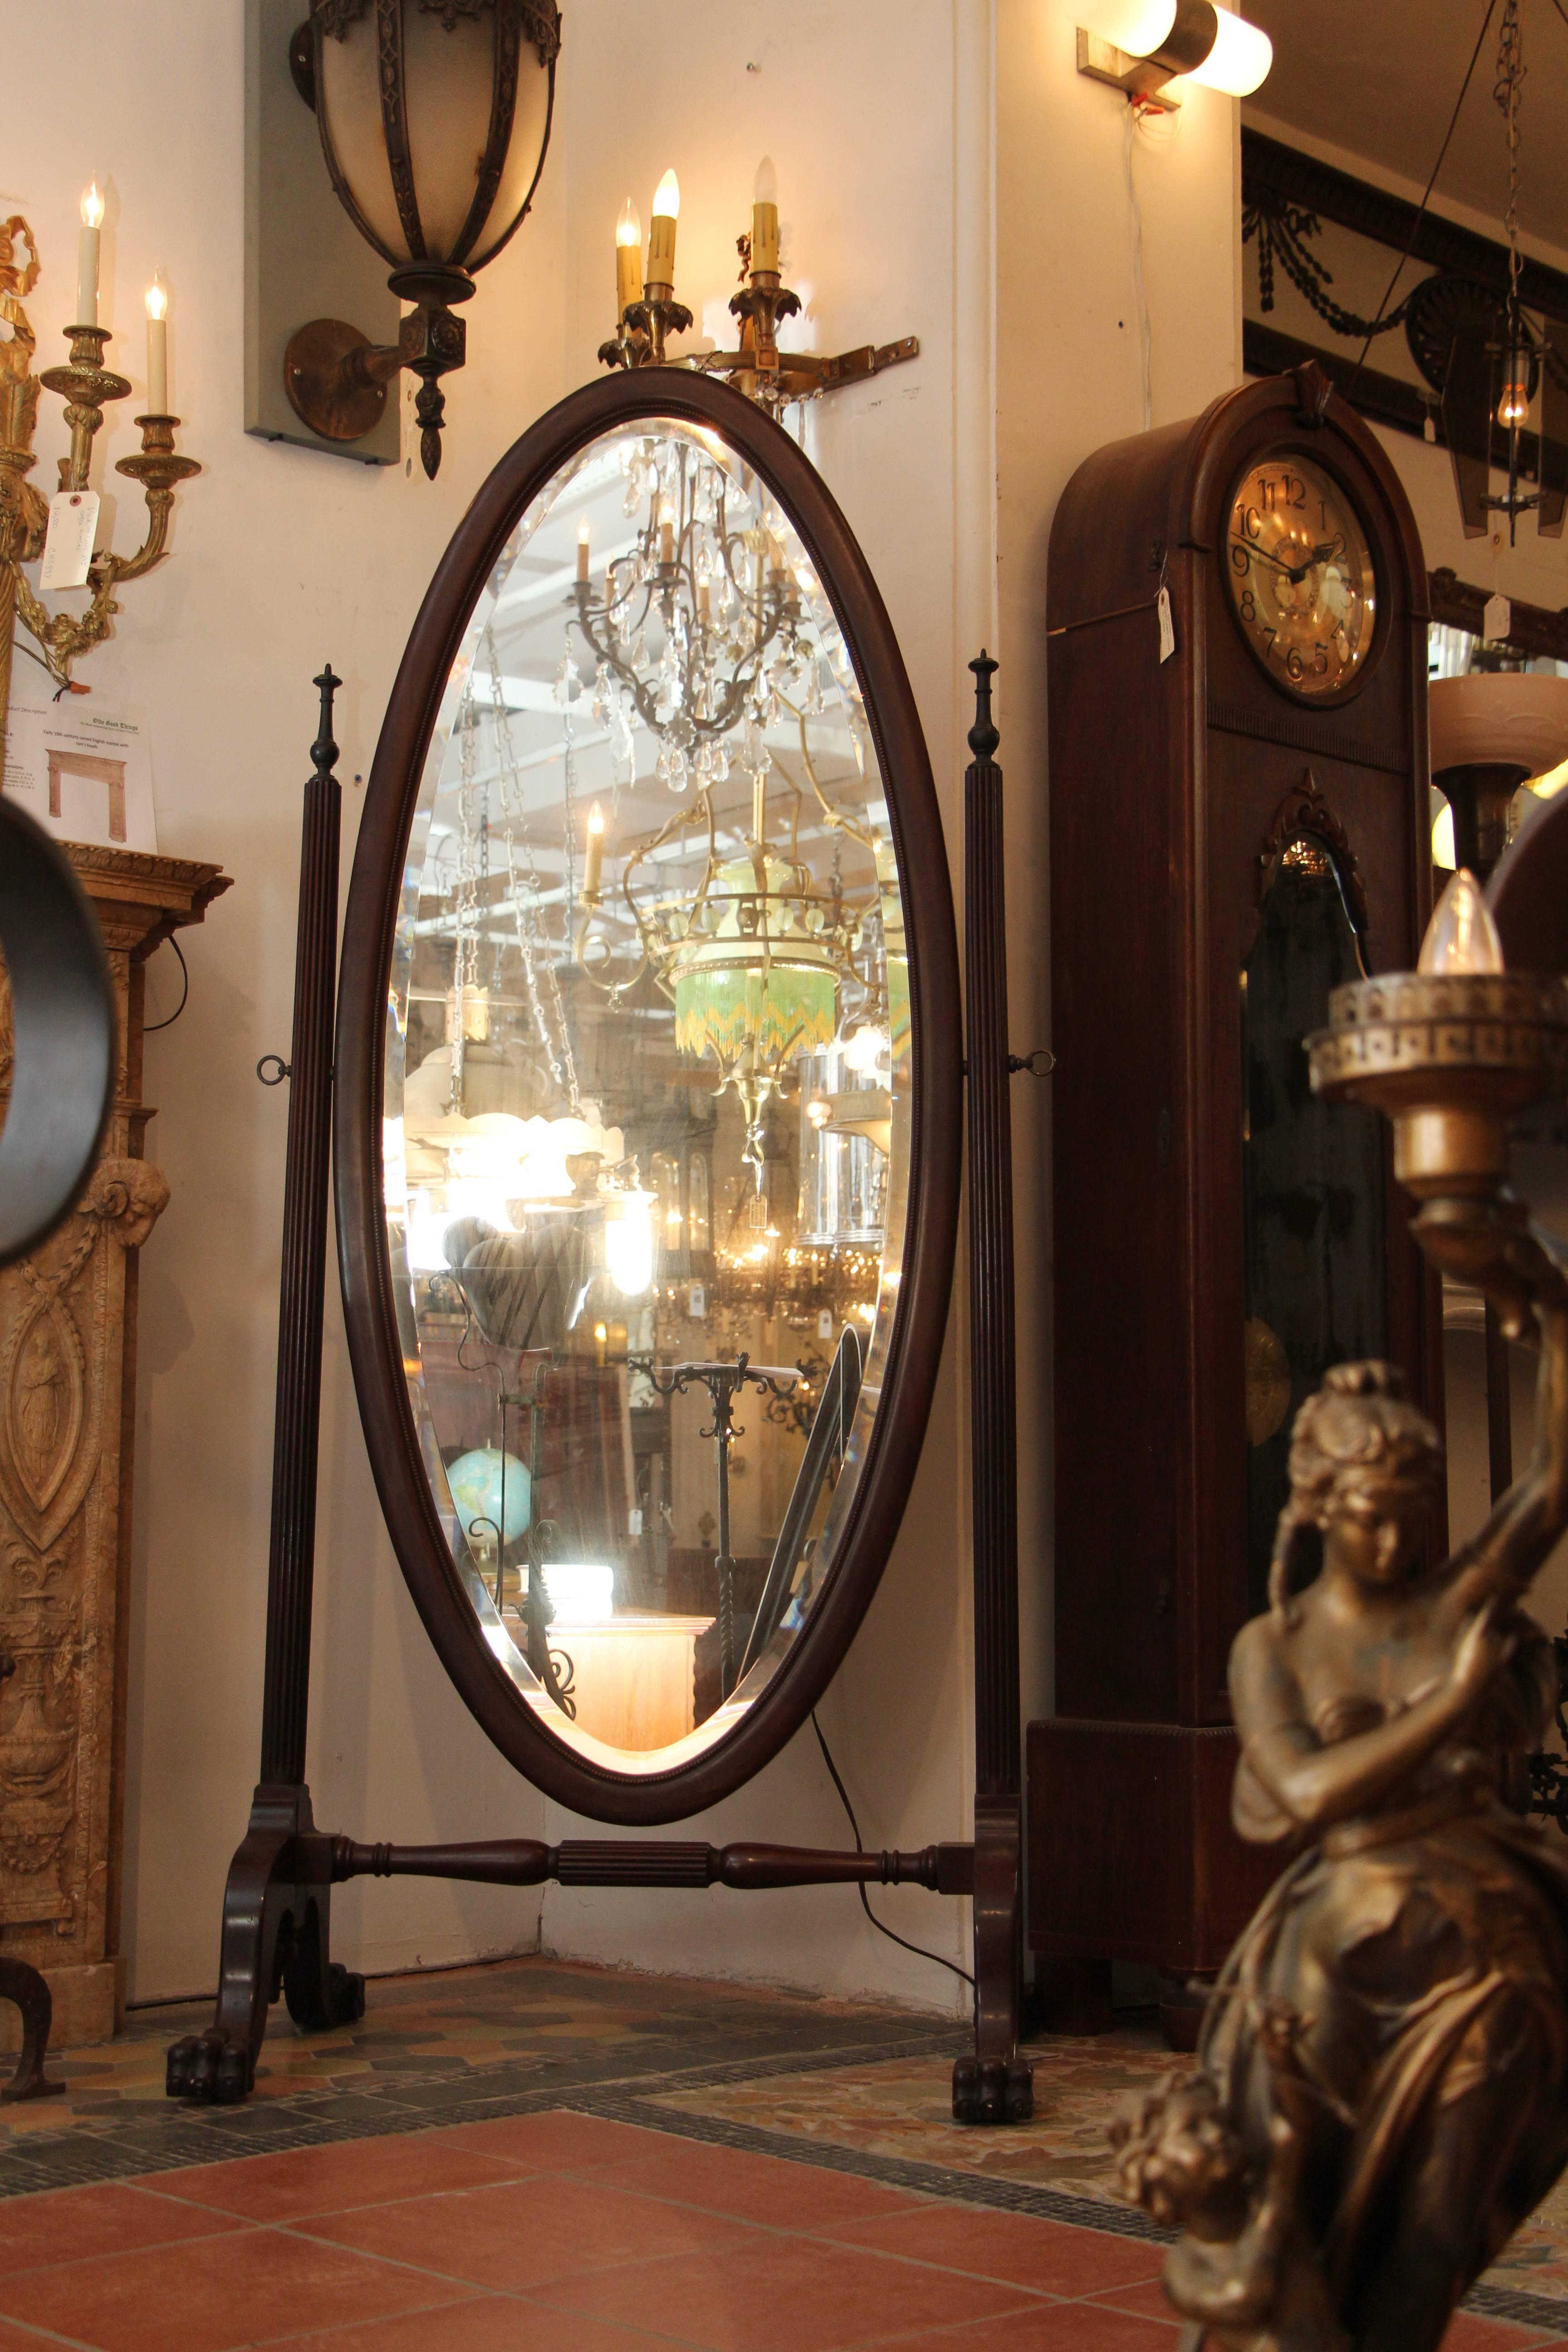 1910 freestanding mahogany cheval mirror with beveled glass and beaded detail. The Stand has claw feet and some carved features. This item can be viewed at our 5 East 16th St, Union Square location in Manhattan.